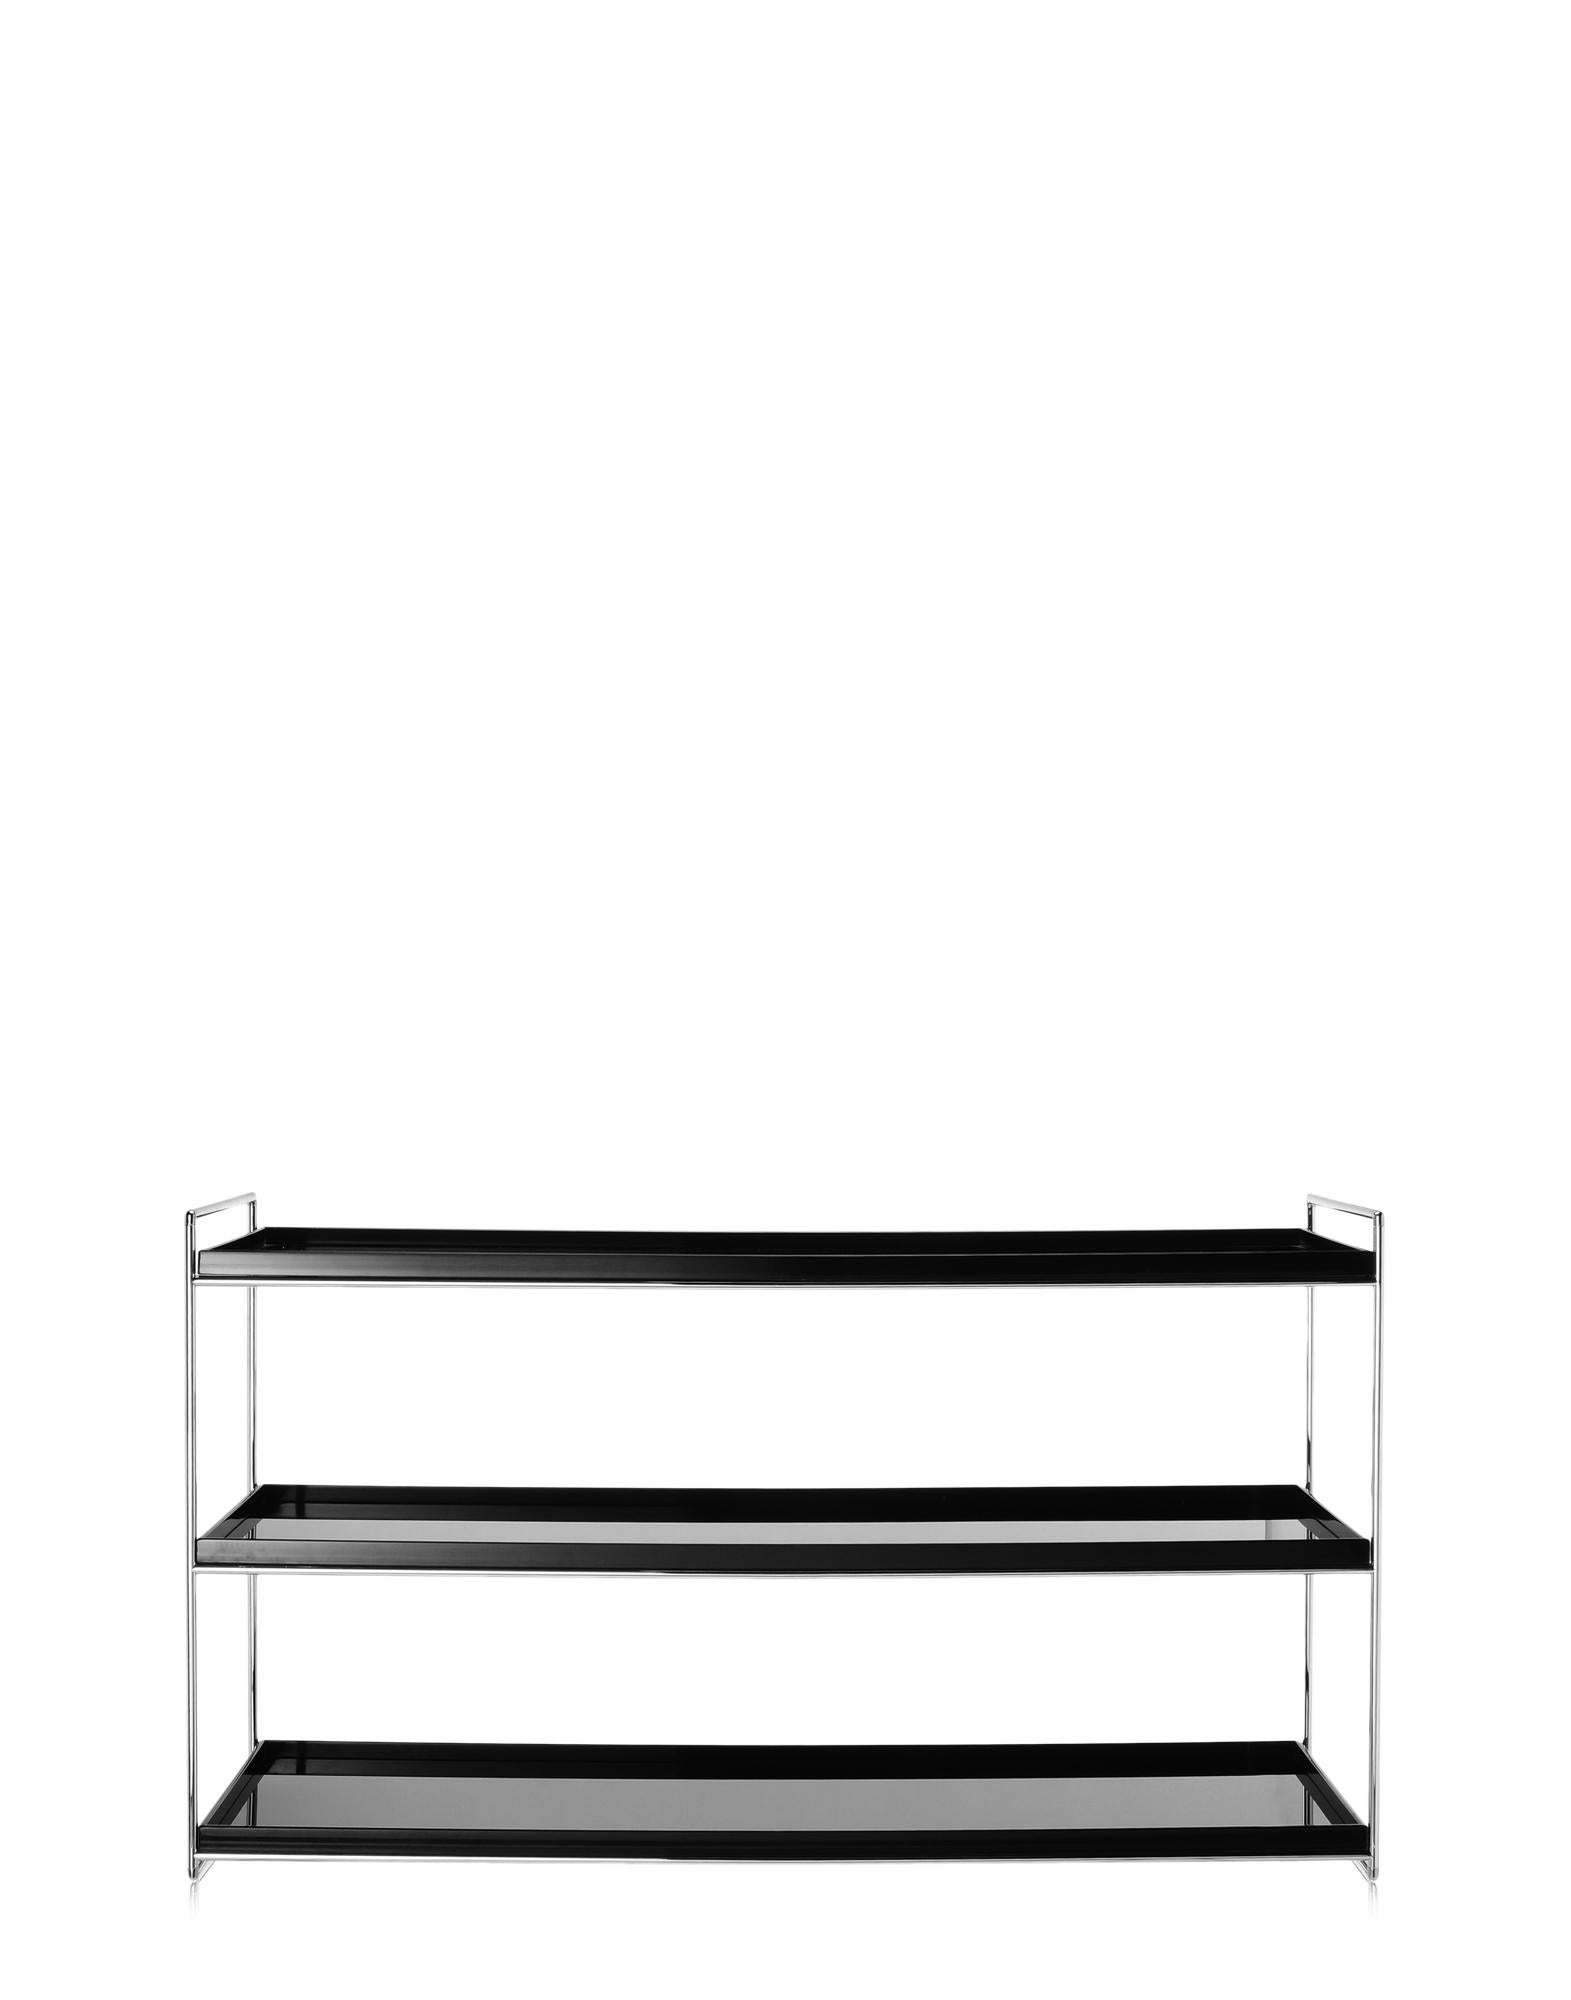 Contemporary Kartell Multi Rectangular Tray Table by Piero Lissoni For Sale